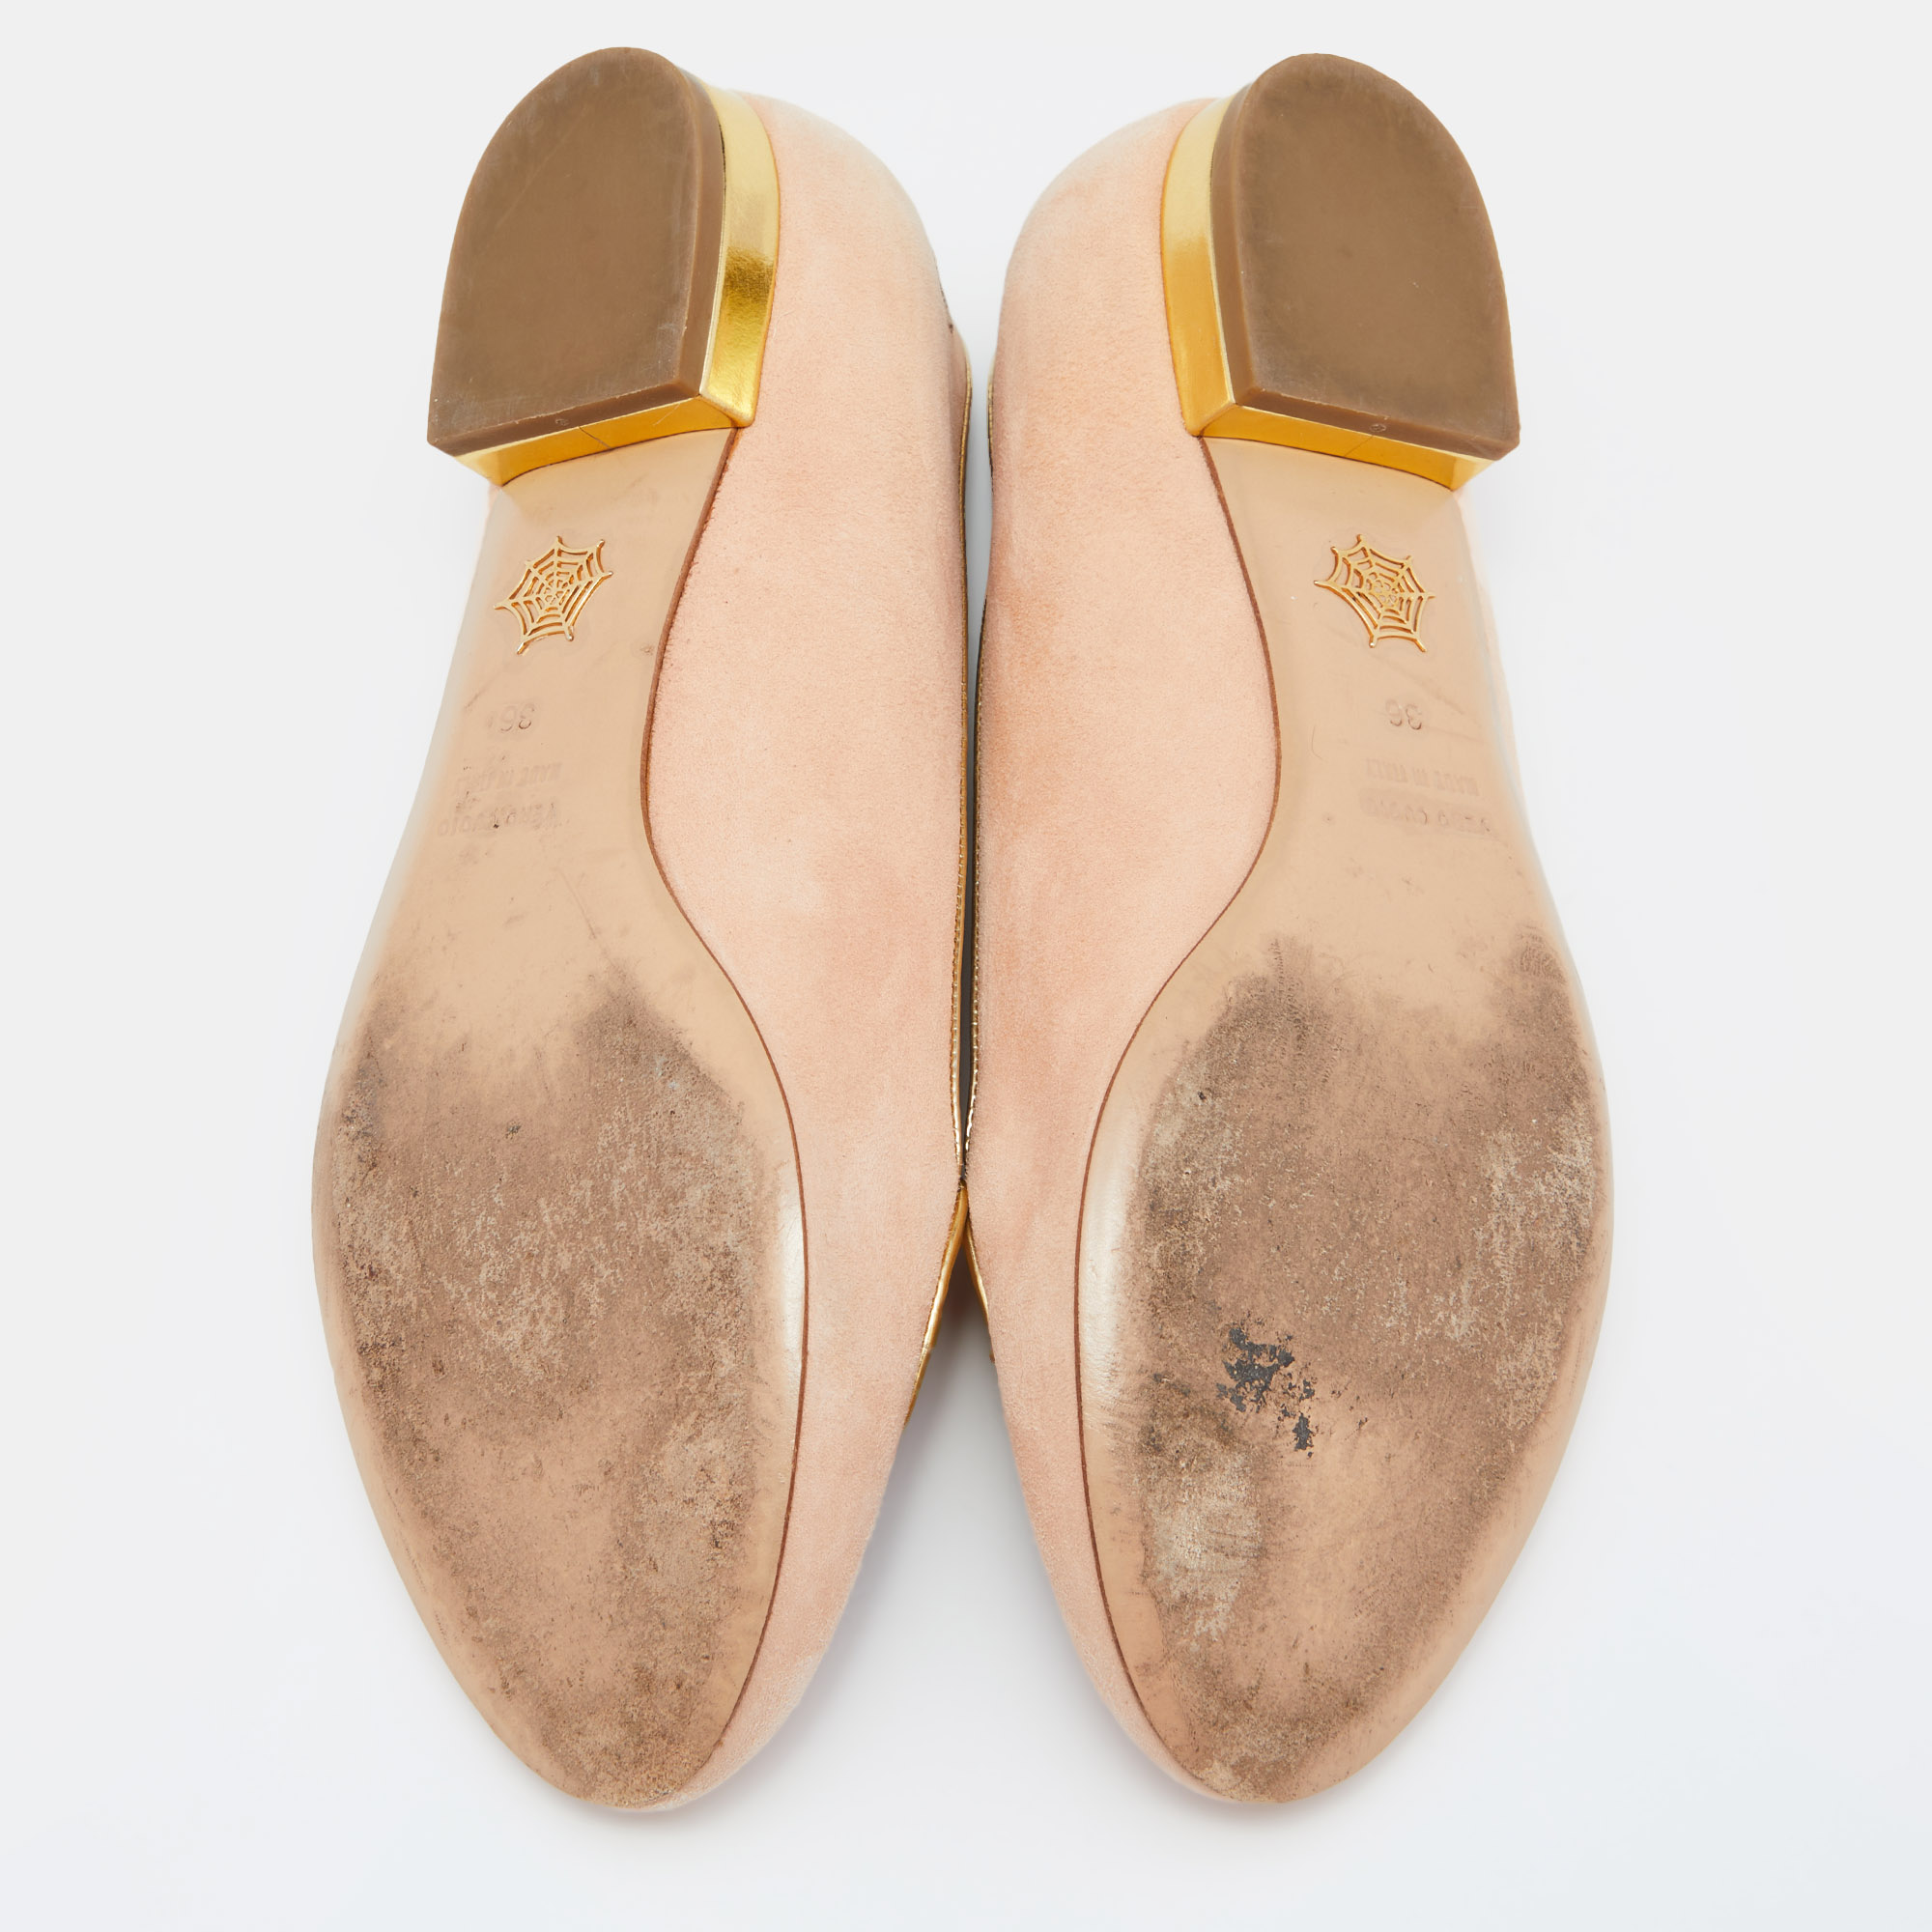 Charlotte Olympia Peach/Gold Suede Cancer Smoking Slippers Size 36